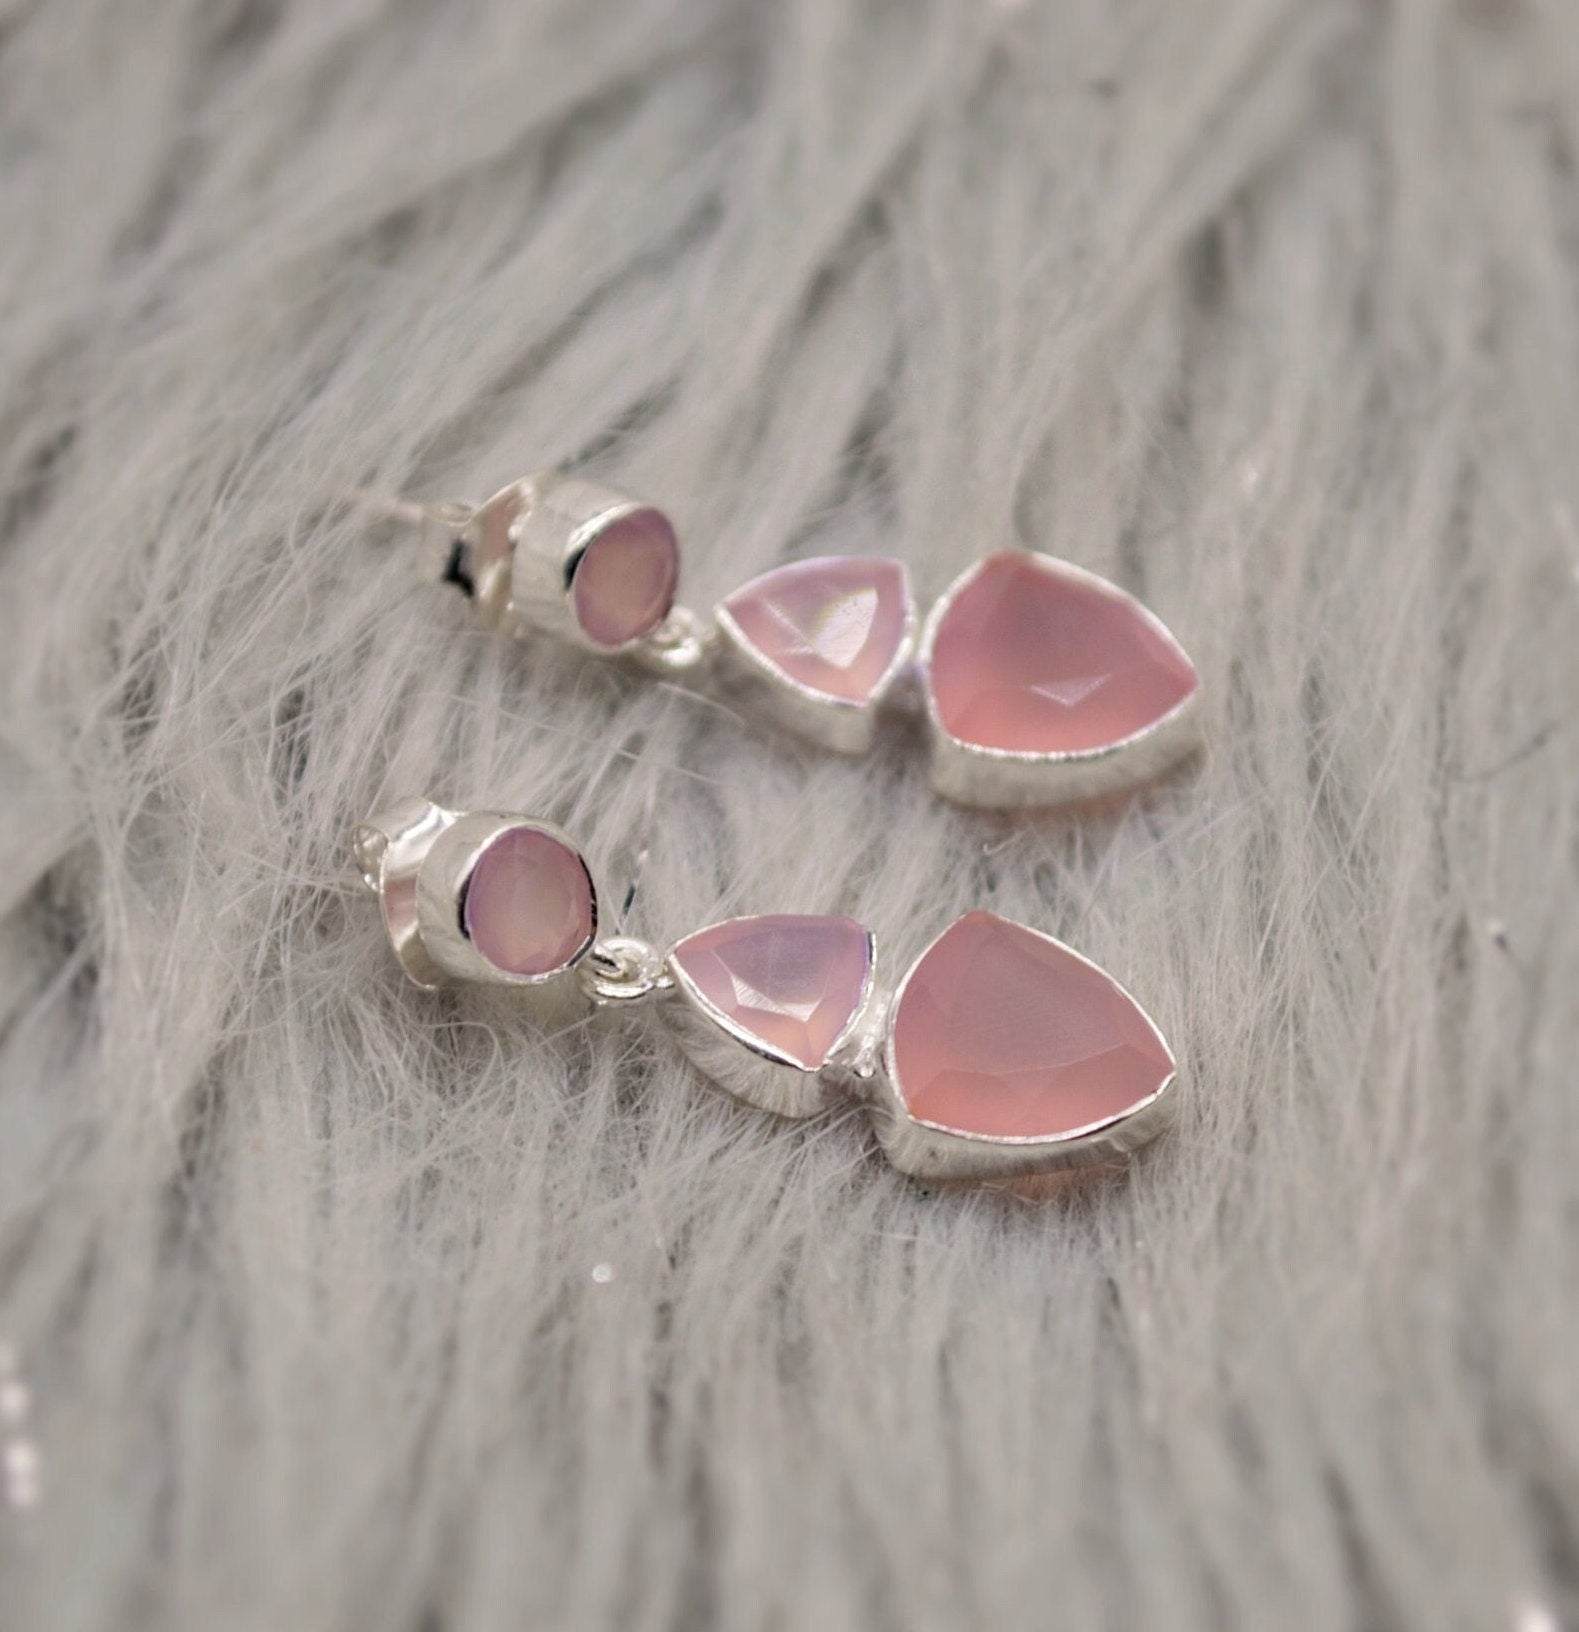 Rose Chalcedony Sterling Silver Drop Earrings, Pink Gemstone Earrings, Unique Statement Earrings, Gifts For Her